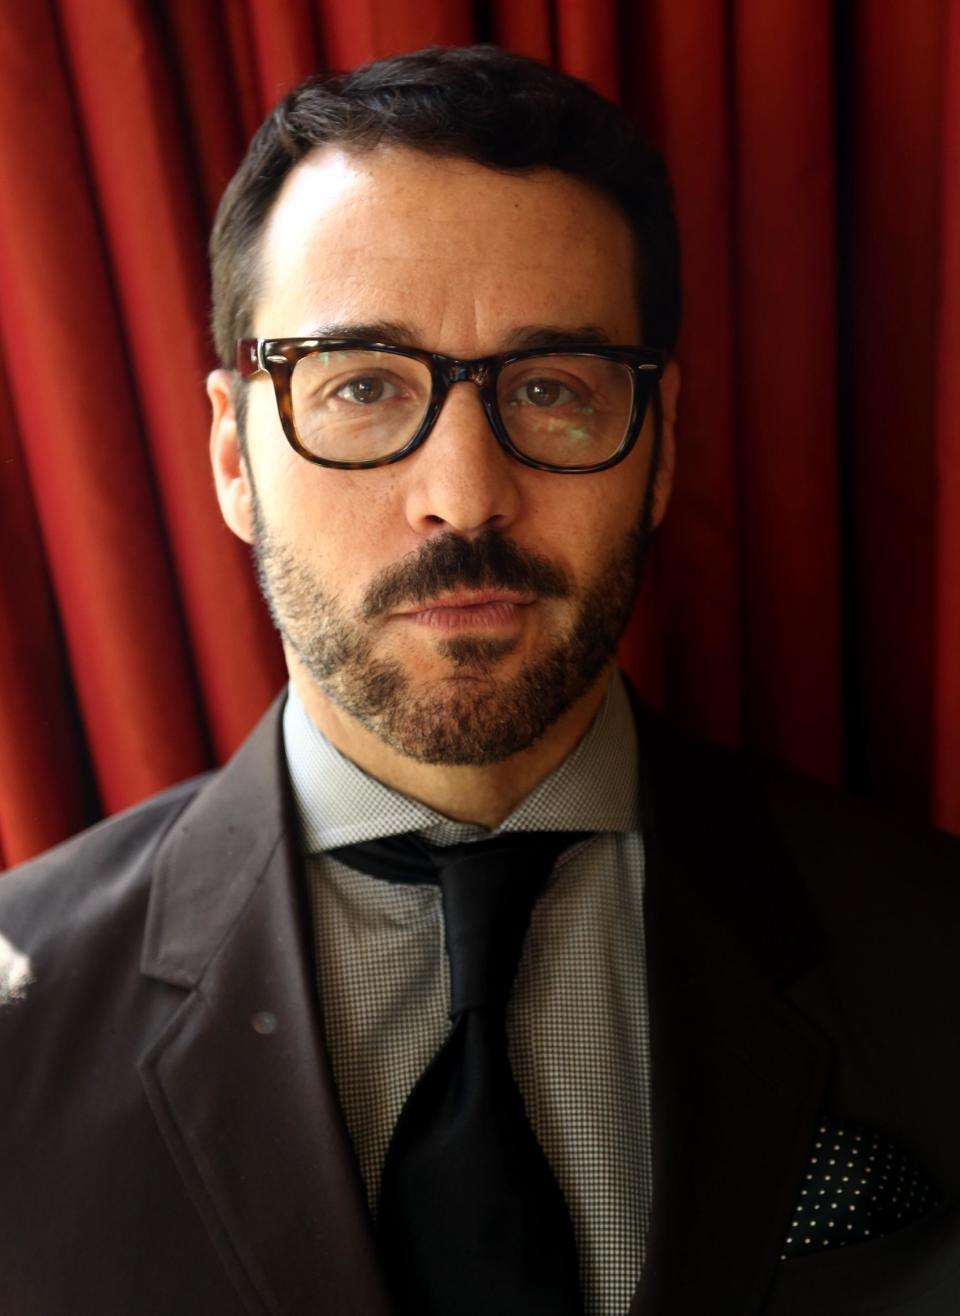 In this Jan. 15, 2013 photo, actor Jeremy Piven, from the television series "Mr. Selfridge," poses for a portrait during the PBS Winter TCA Tour at the Langham Huntington Hotel in Pasadena, Calif. "Mr. Selfridge," starring Piven as the real-life American entrepreneur whose mission was to transform and conquer British retailing, is airing not on the frisky, few-holds-barred HBO home of "Entourage," but on restrained PBS. (Photo by Matt Sayles/Invision/AP)